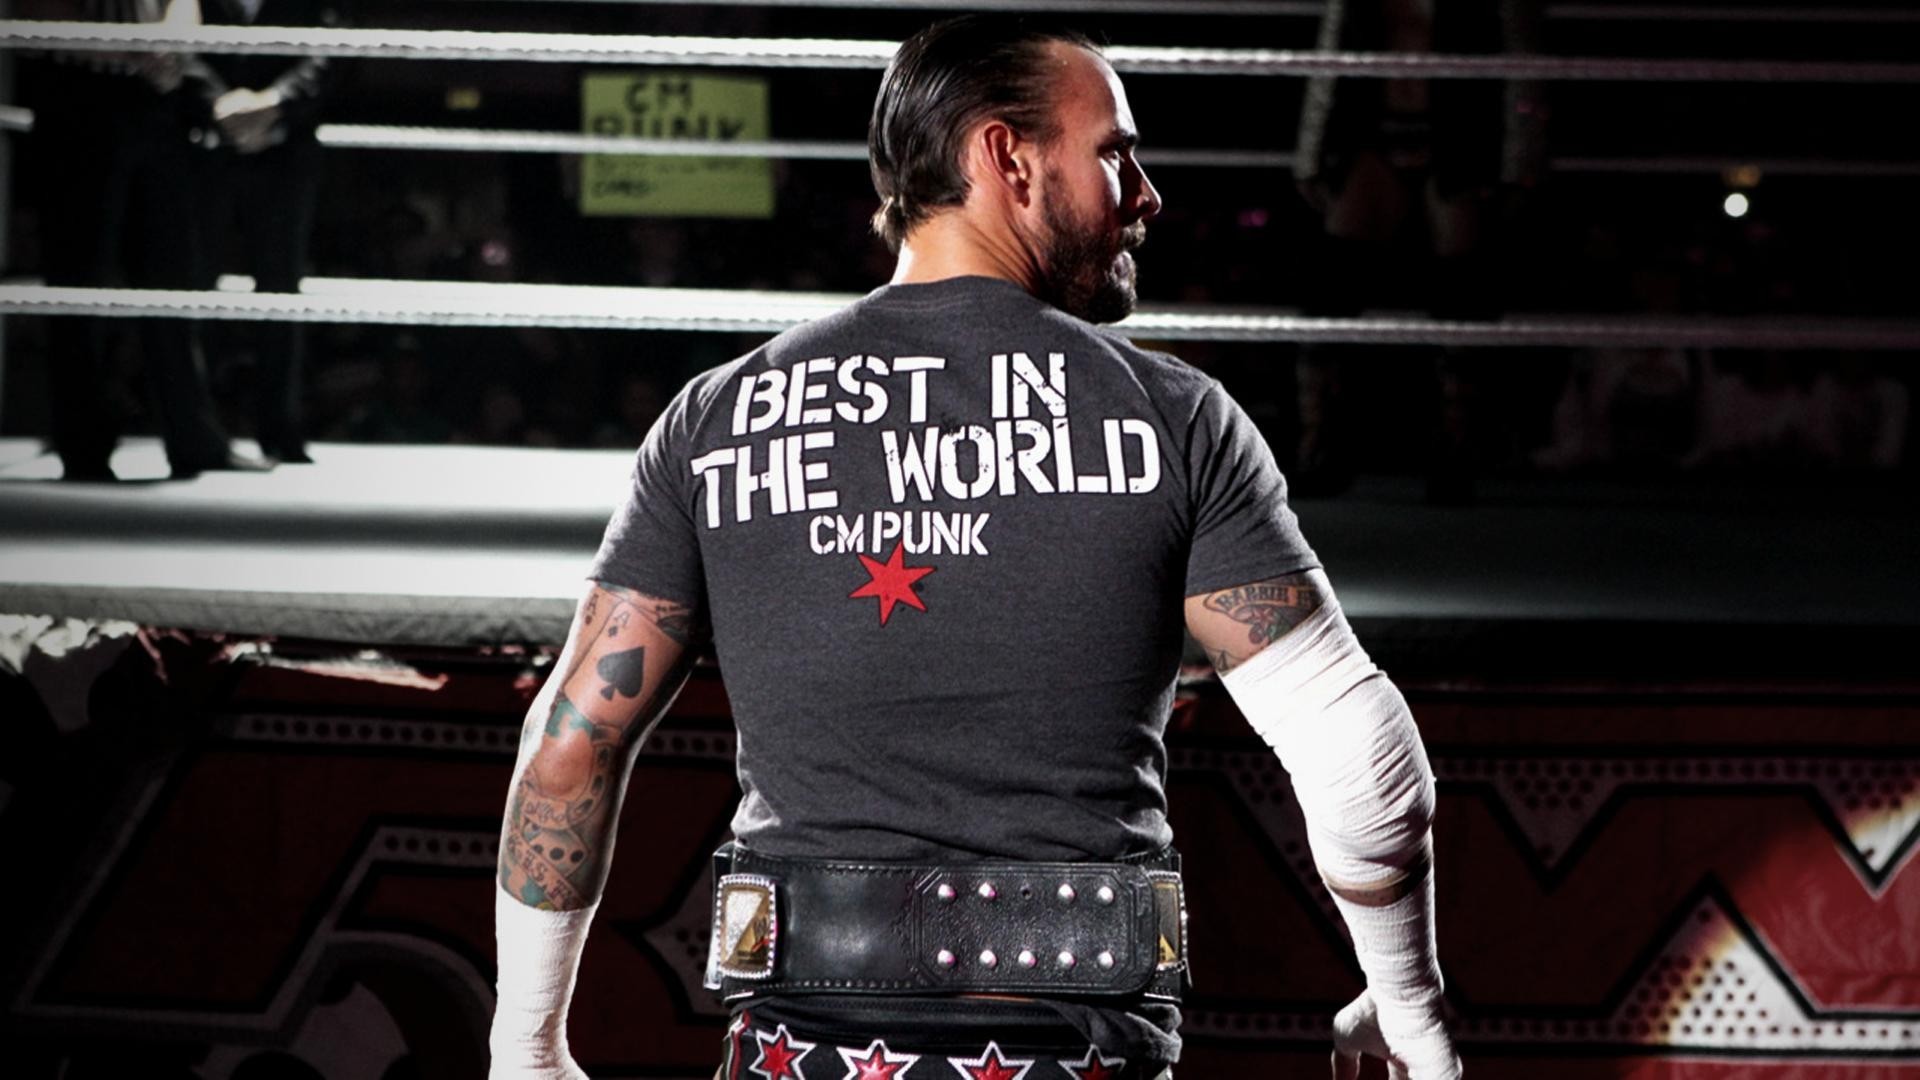 Cm Punk 2018 Best in the World Wallpaper (70+ images)